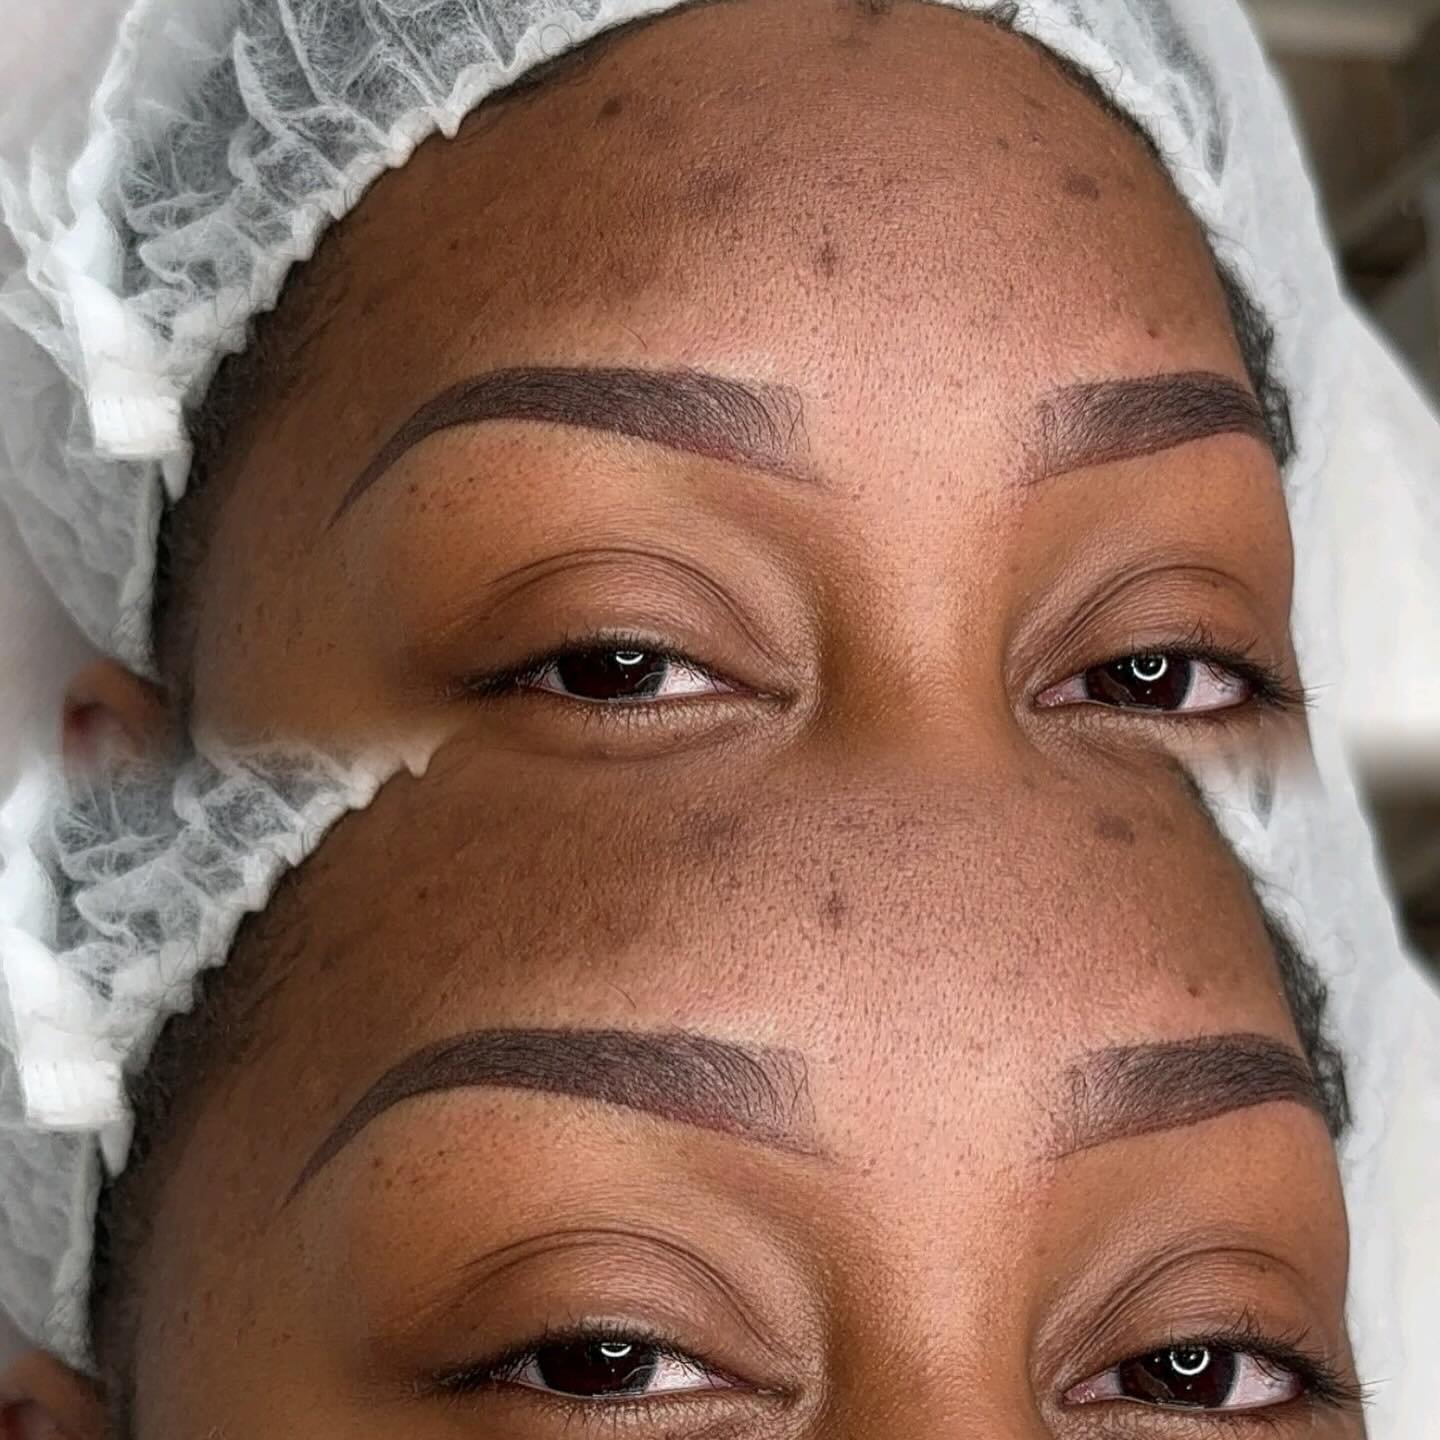 Get a boost of confidence with ombr&eacute; powder brows! 
&bull;
&bull;
&bull;
&bull;
&bull;
&bull;
#atlantamicroblading #microblading #ombrepowderbrows #nanostrokes #nanostrokesatlanta #ombrepowderbrowsatlanta #atlantaeyebrows #nanoblading #nanobla